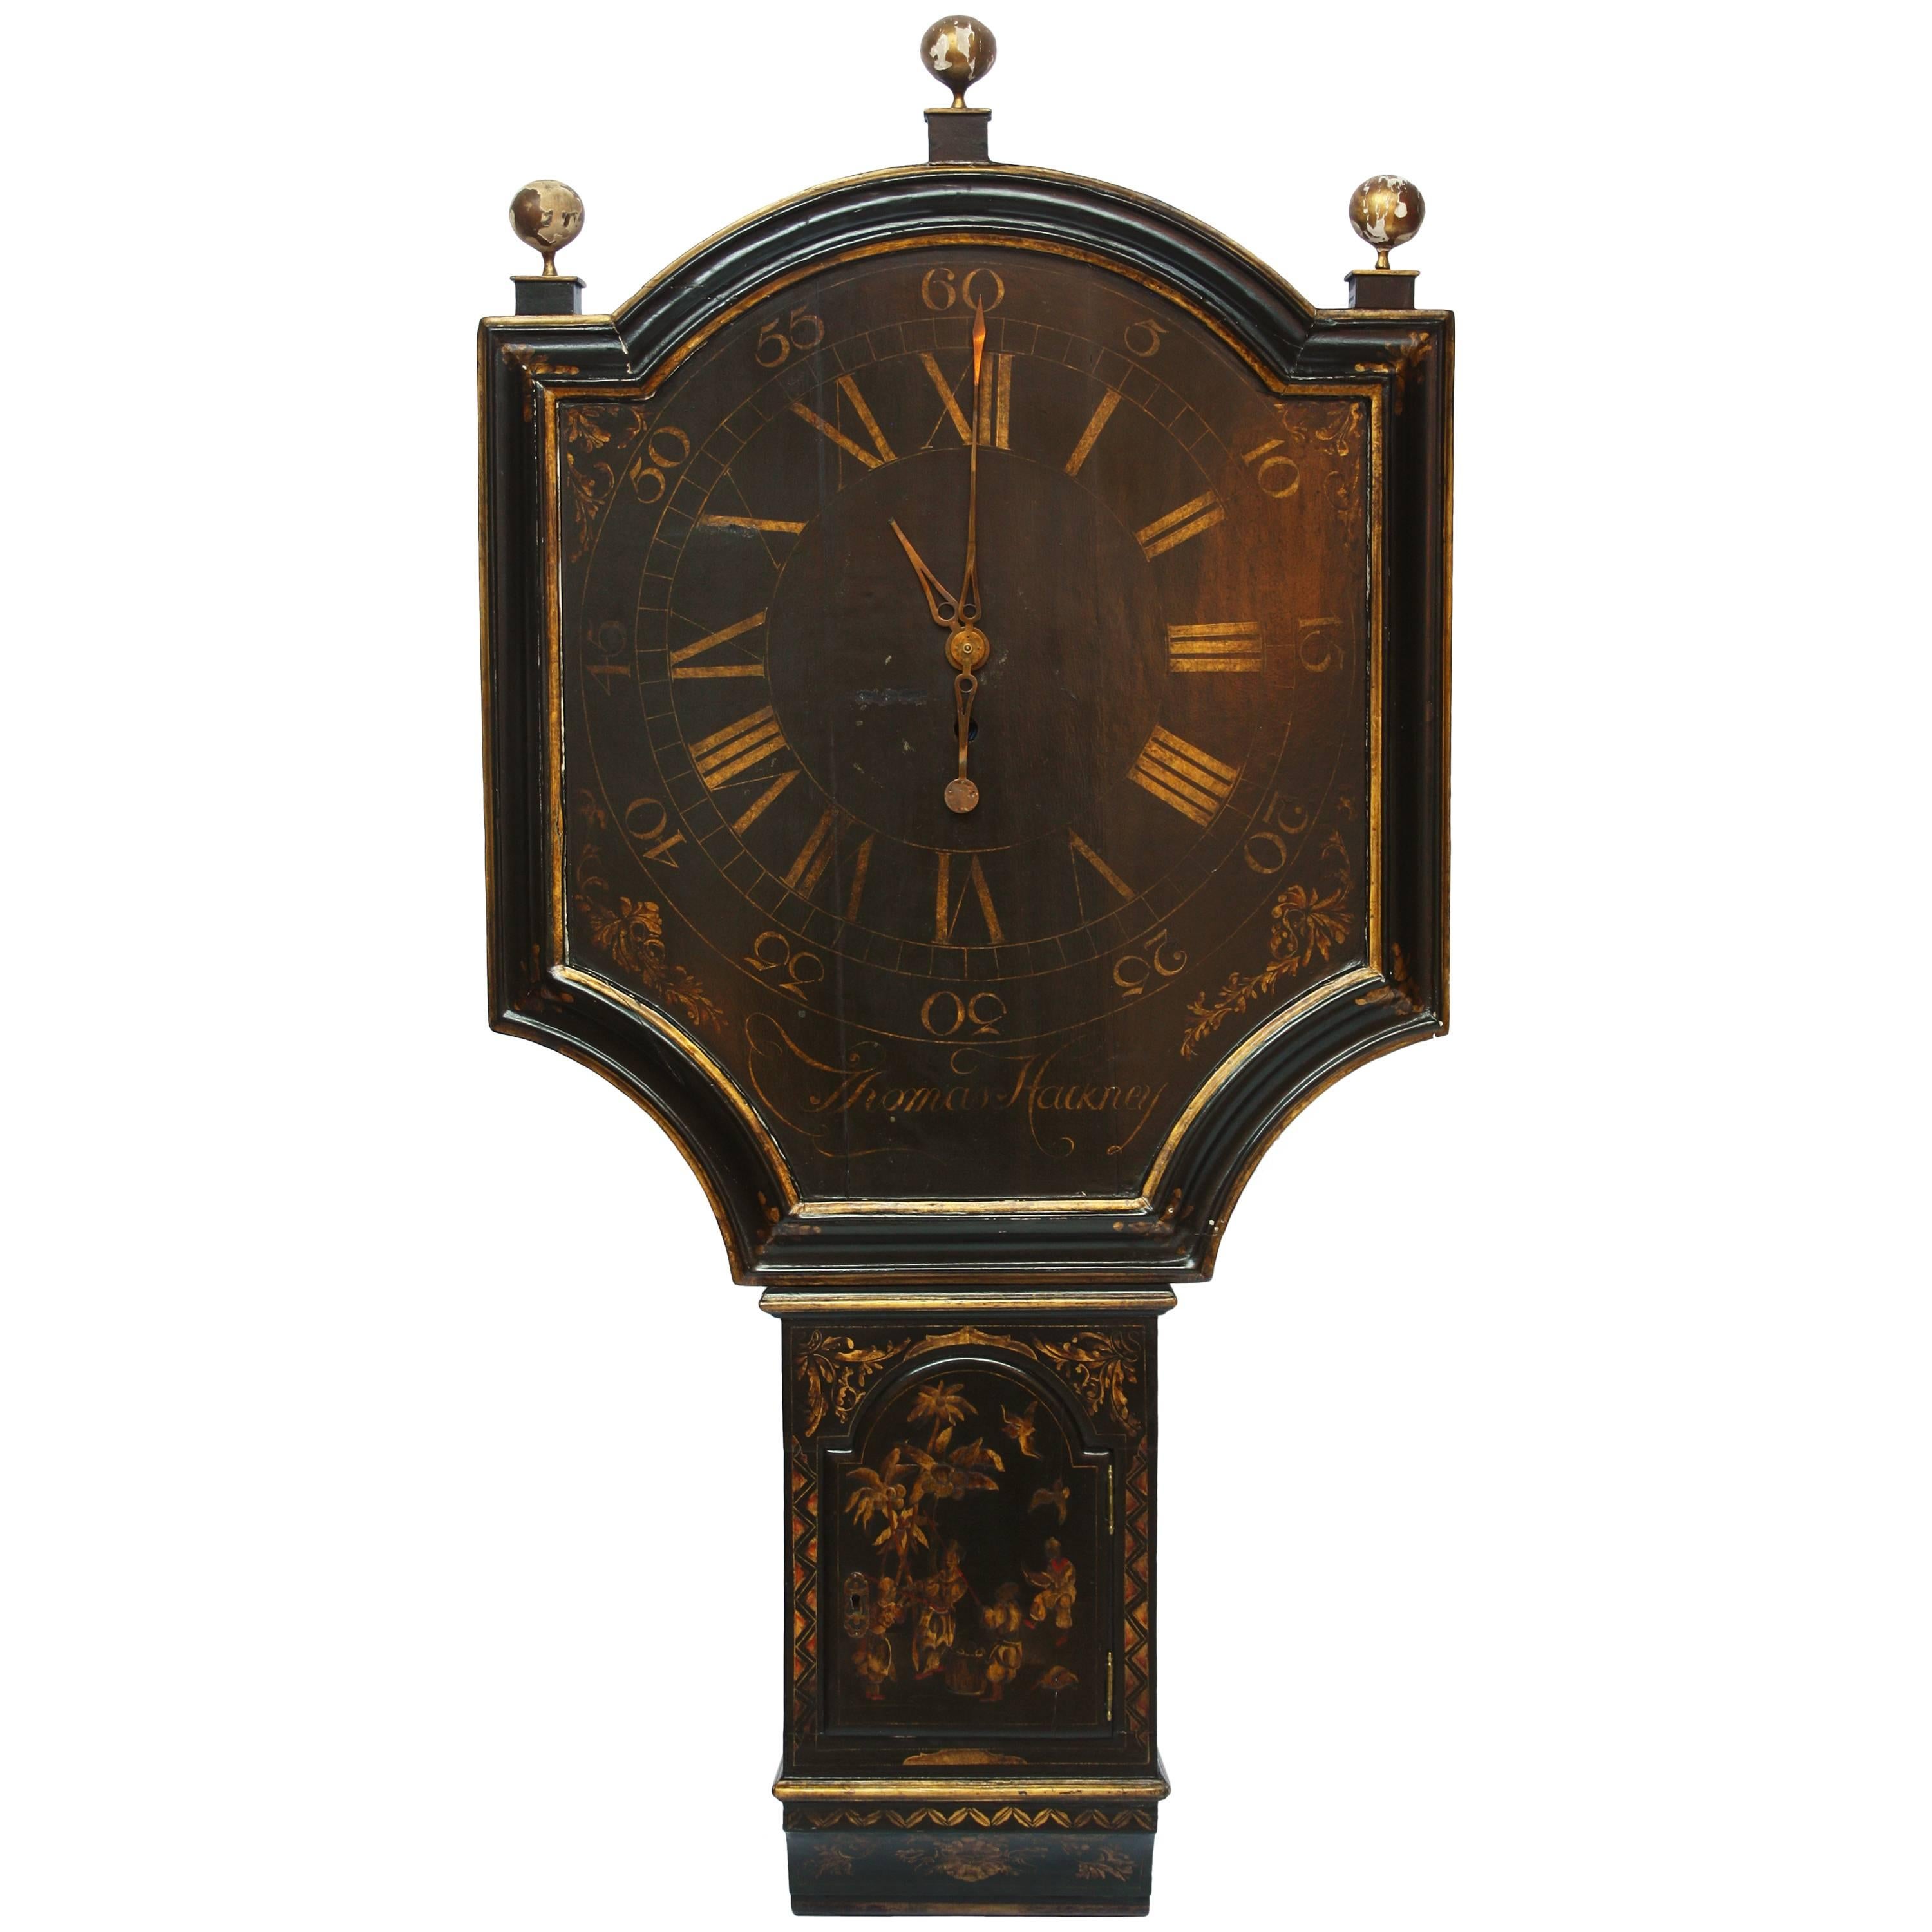 Act of Parliament Clock Case / George II Japanned by Thomas Hackney